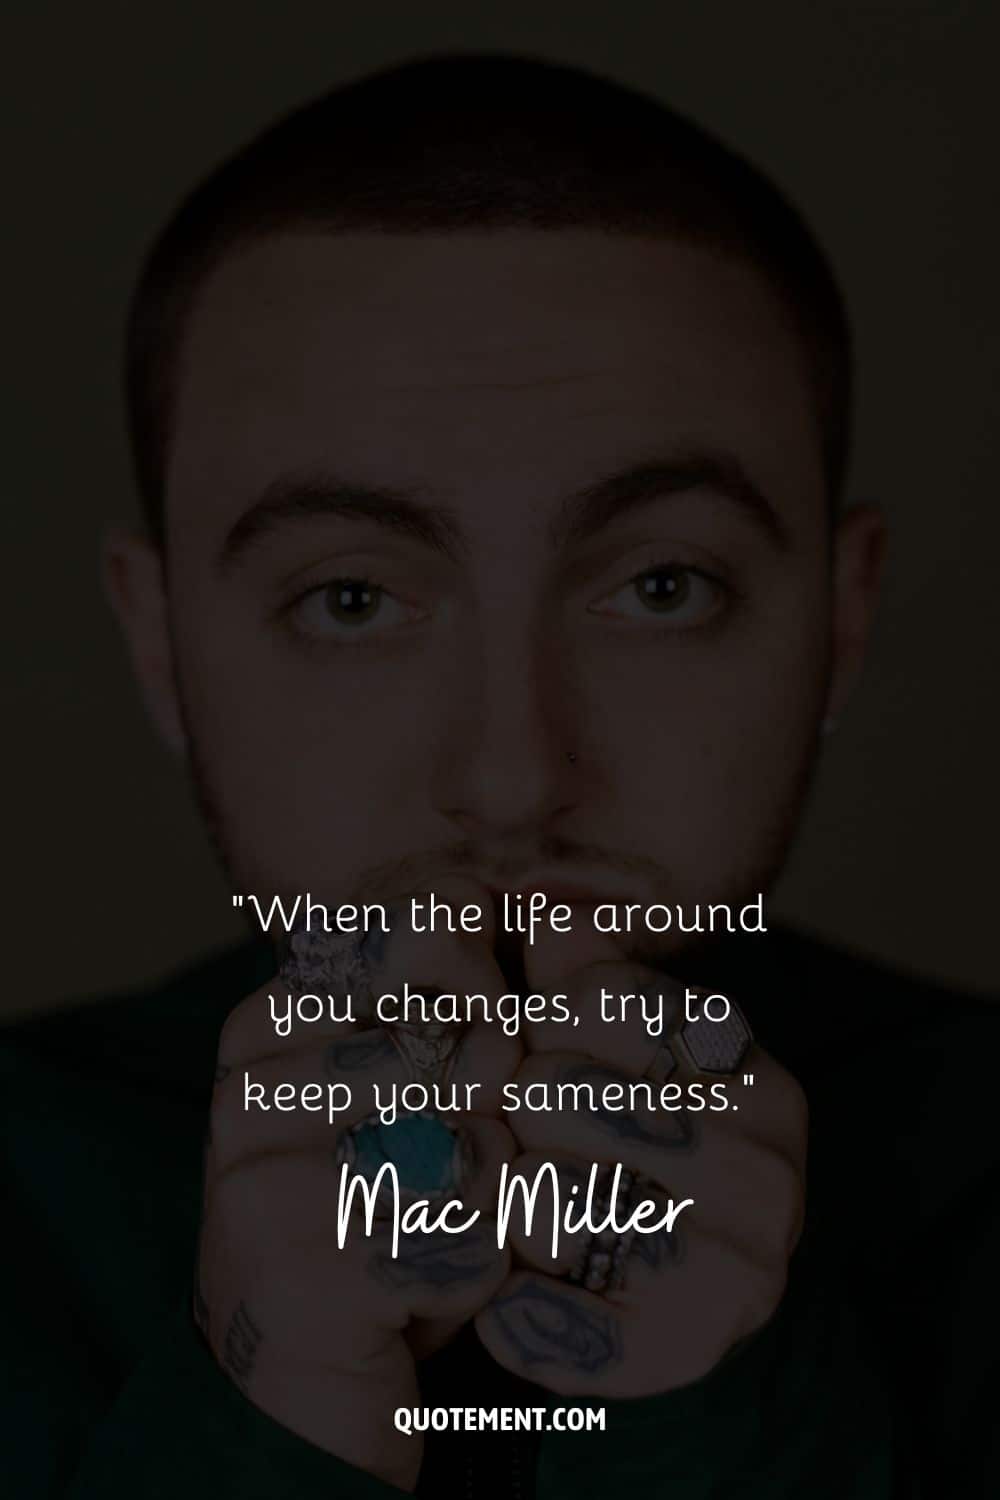 “When the life around you changes, try to keep your sameness.” – Mac Miller